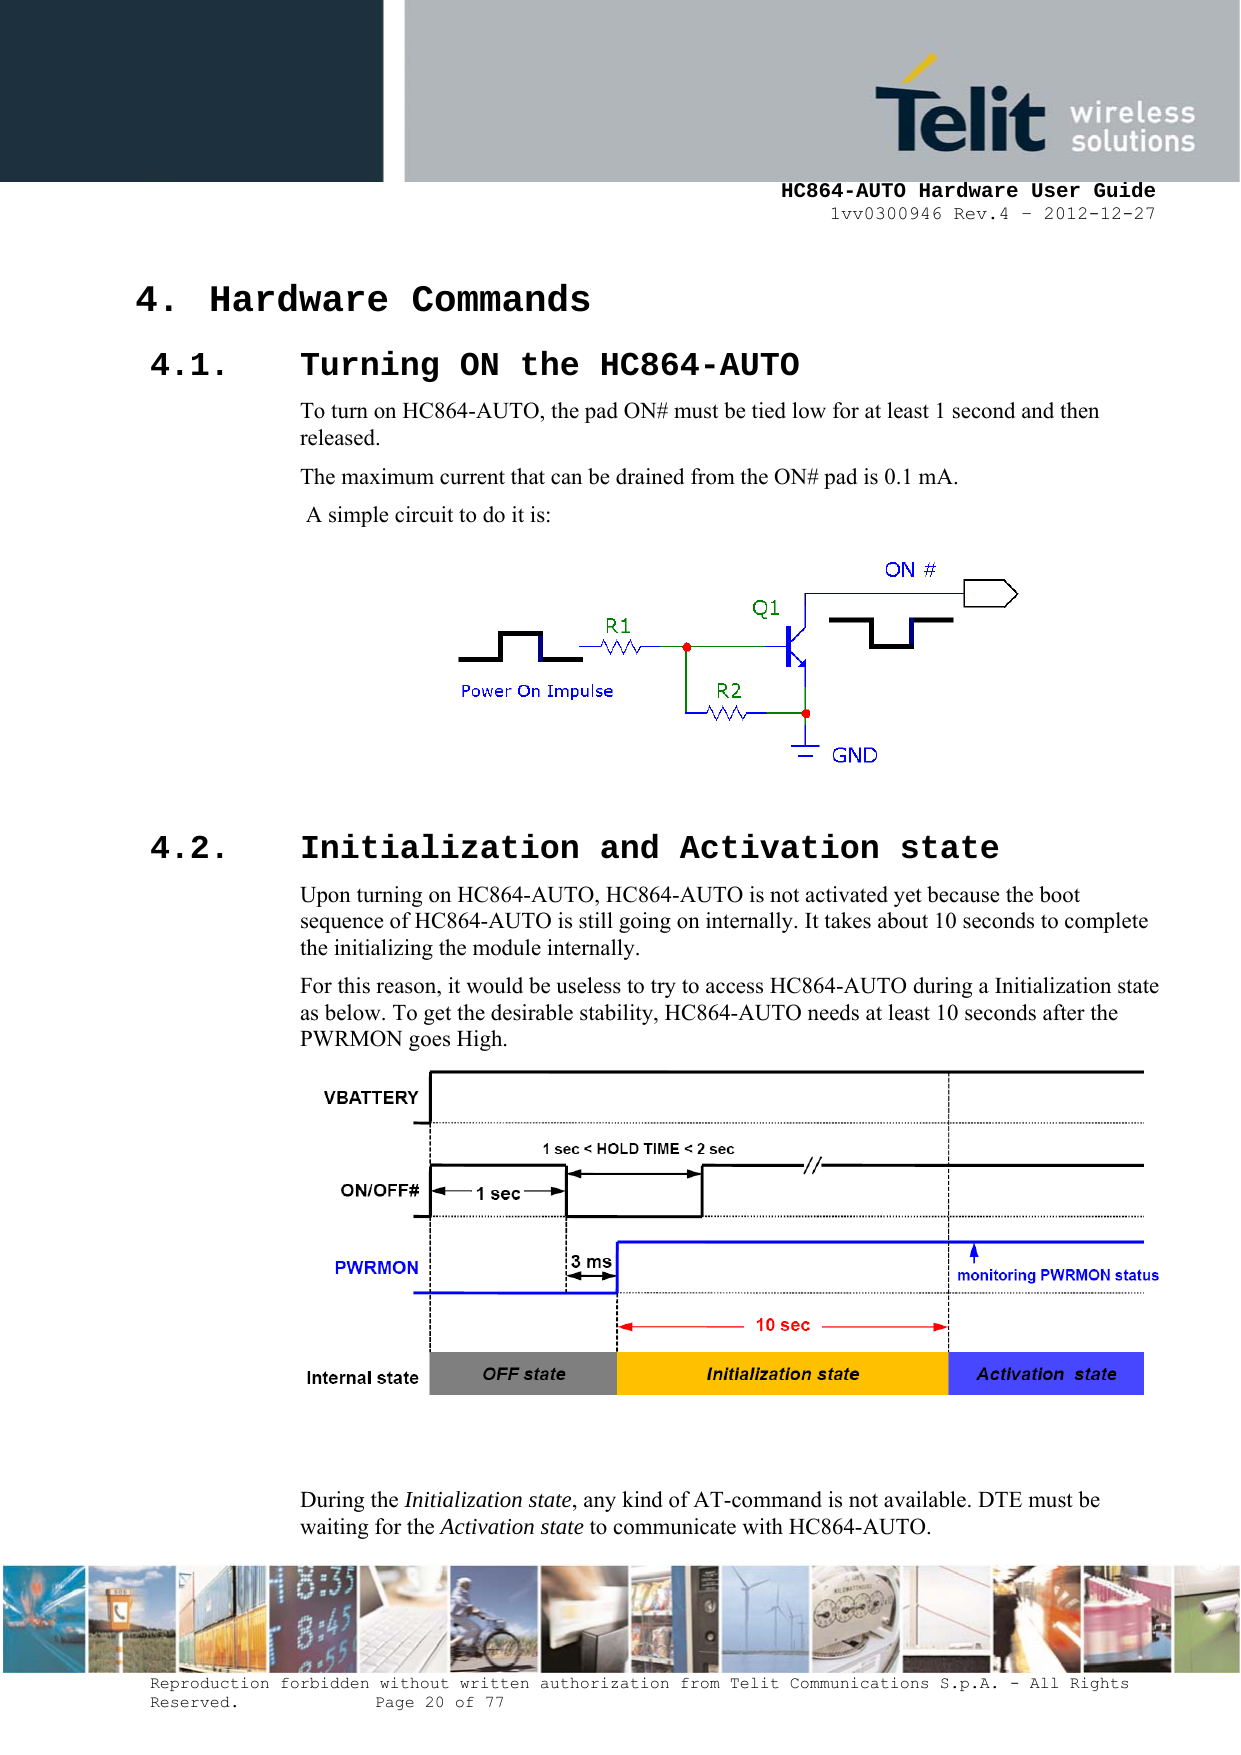     HC864-AUTO Hardware User Guide 1vv0300946 Rev.4 – 2012-12-27 Reproduction forbidden without written authorization from Telit Communications S.p.A. - All Rights Reserved.    Page 20 of 77  4. Hardware Commands 4.1. Turning ON the HC864-AUTO To turn on HC864-AUTO, the pad ON# must be tied low for at least 1 second and then released. The maximum current that can be drained from the ON# pad is 0.1 mA.  A simple circuit to do it is:   4.2. Initialization and Activation state Upon turning on HC864-AUTO, HC864-AUTO is not activated yet because the boot sequence of HC864-AUTO is still going on internally. It takes about 10 seconds to complete the initializing the module internally. For this reason, it would be useless to try to access HC864-AUTO during a Initialization state as below. To get the desirable stability, HC864-AUTO needs at least 10 seconds after the PWRMON goes High.    During the Initialization state, any kind of AT-command is not available. DTE must be waiting for the Activation state to communicate with HC864-AUTO. 